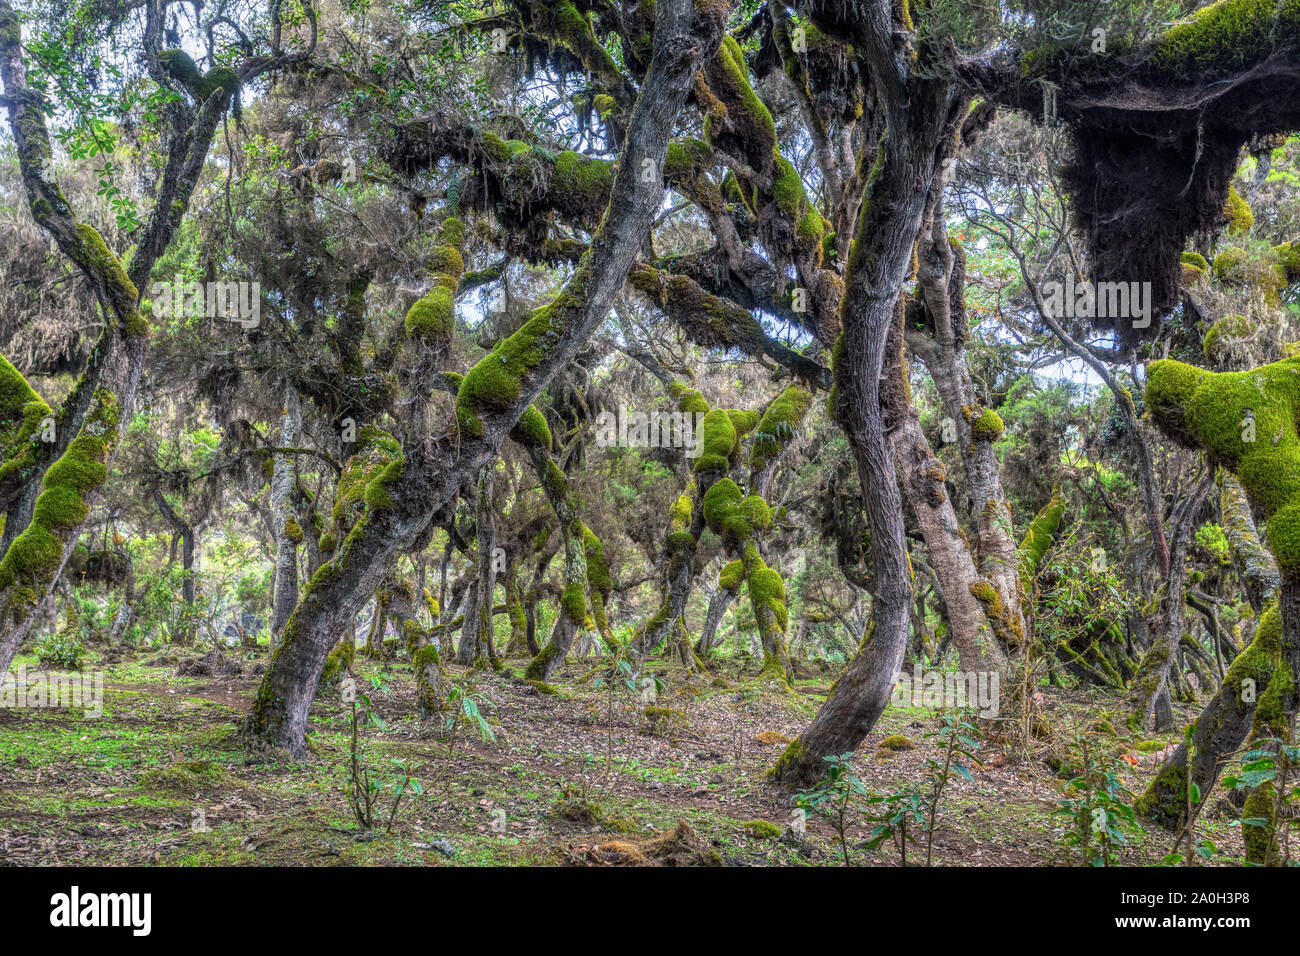 mystical Harenna Forest landscape, part of highland region of the Bale Mountains. One of the few remaining natural forests in the country. Oromia Regi Stock Photo